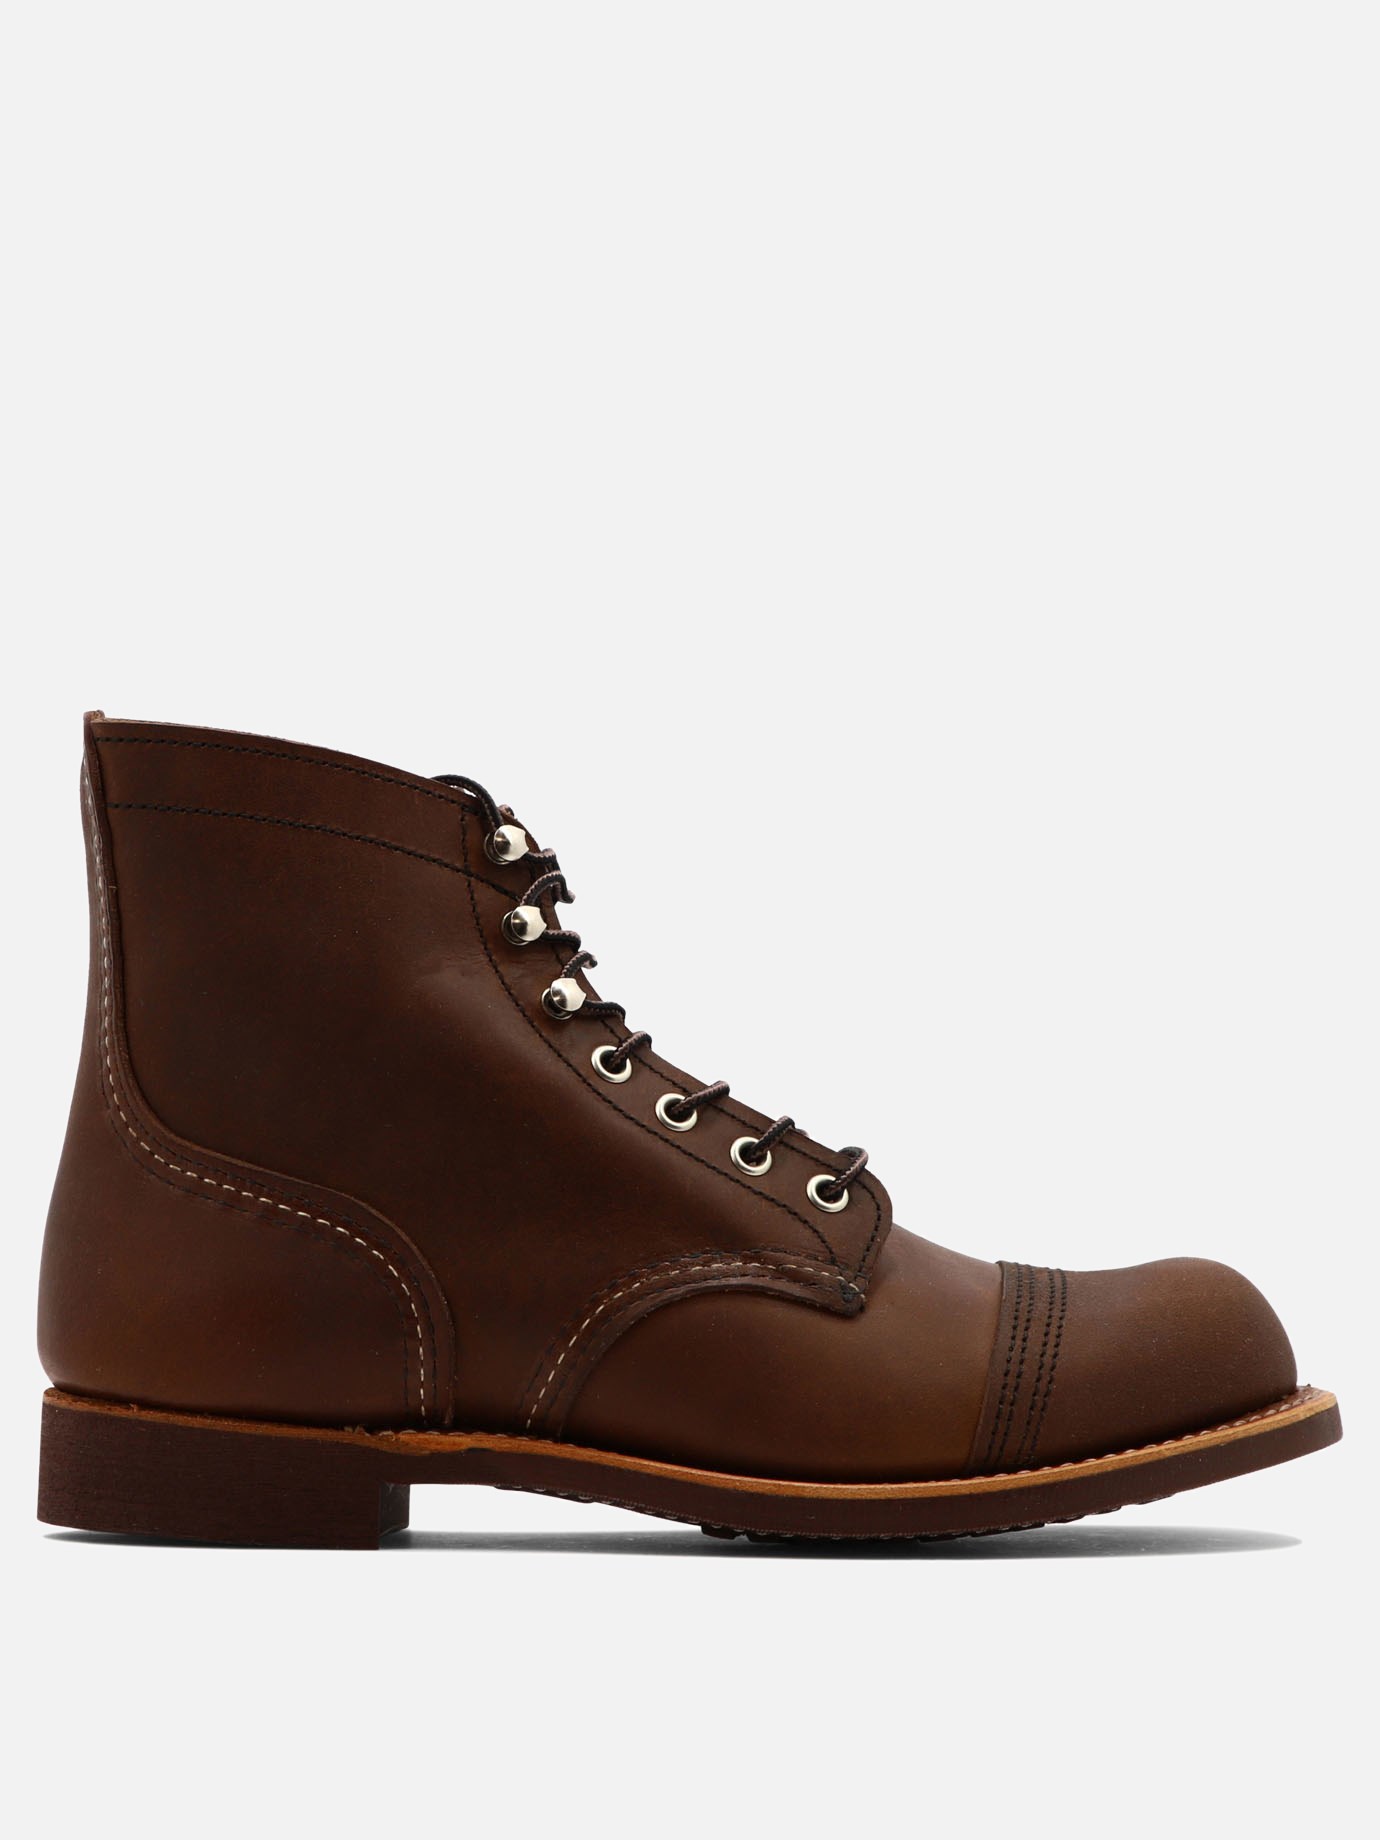  Iron Ranger  ankle bootsby Red Wing Shoes - 4